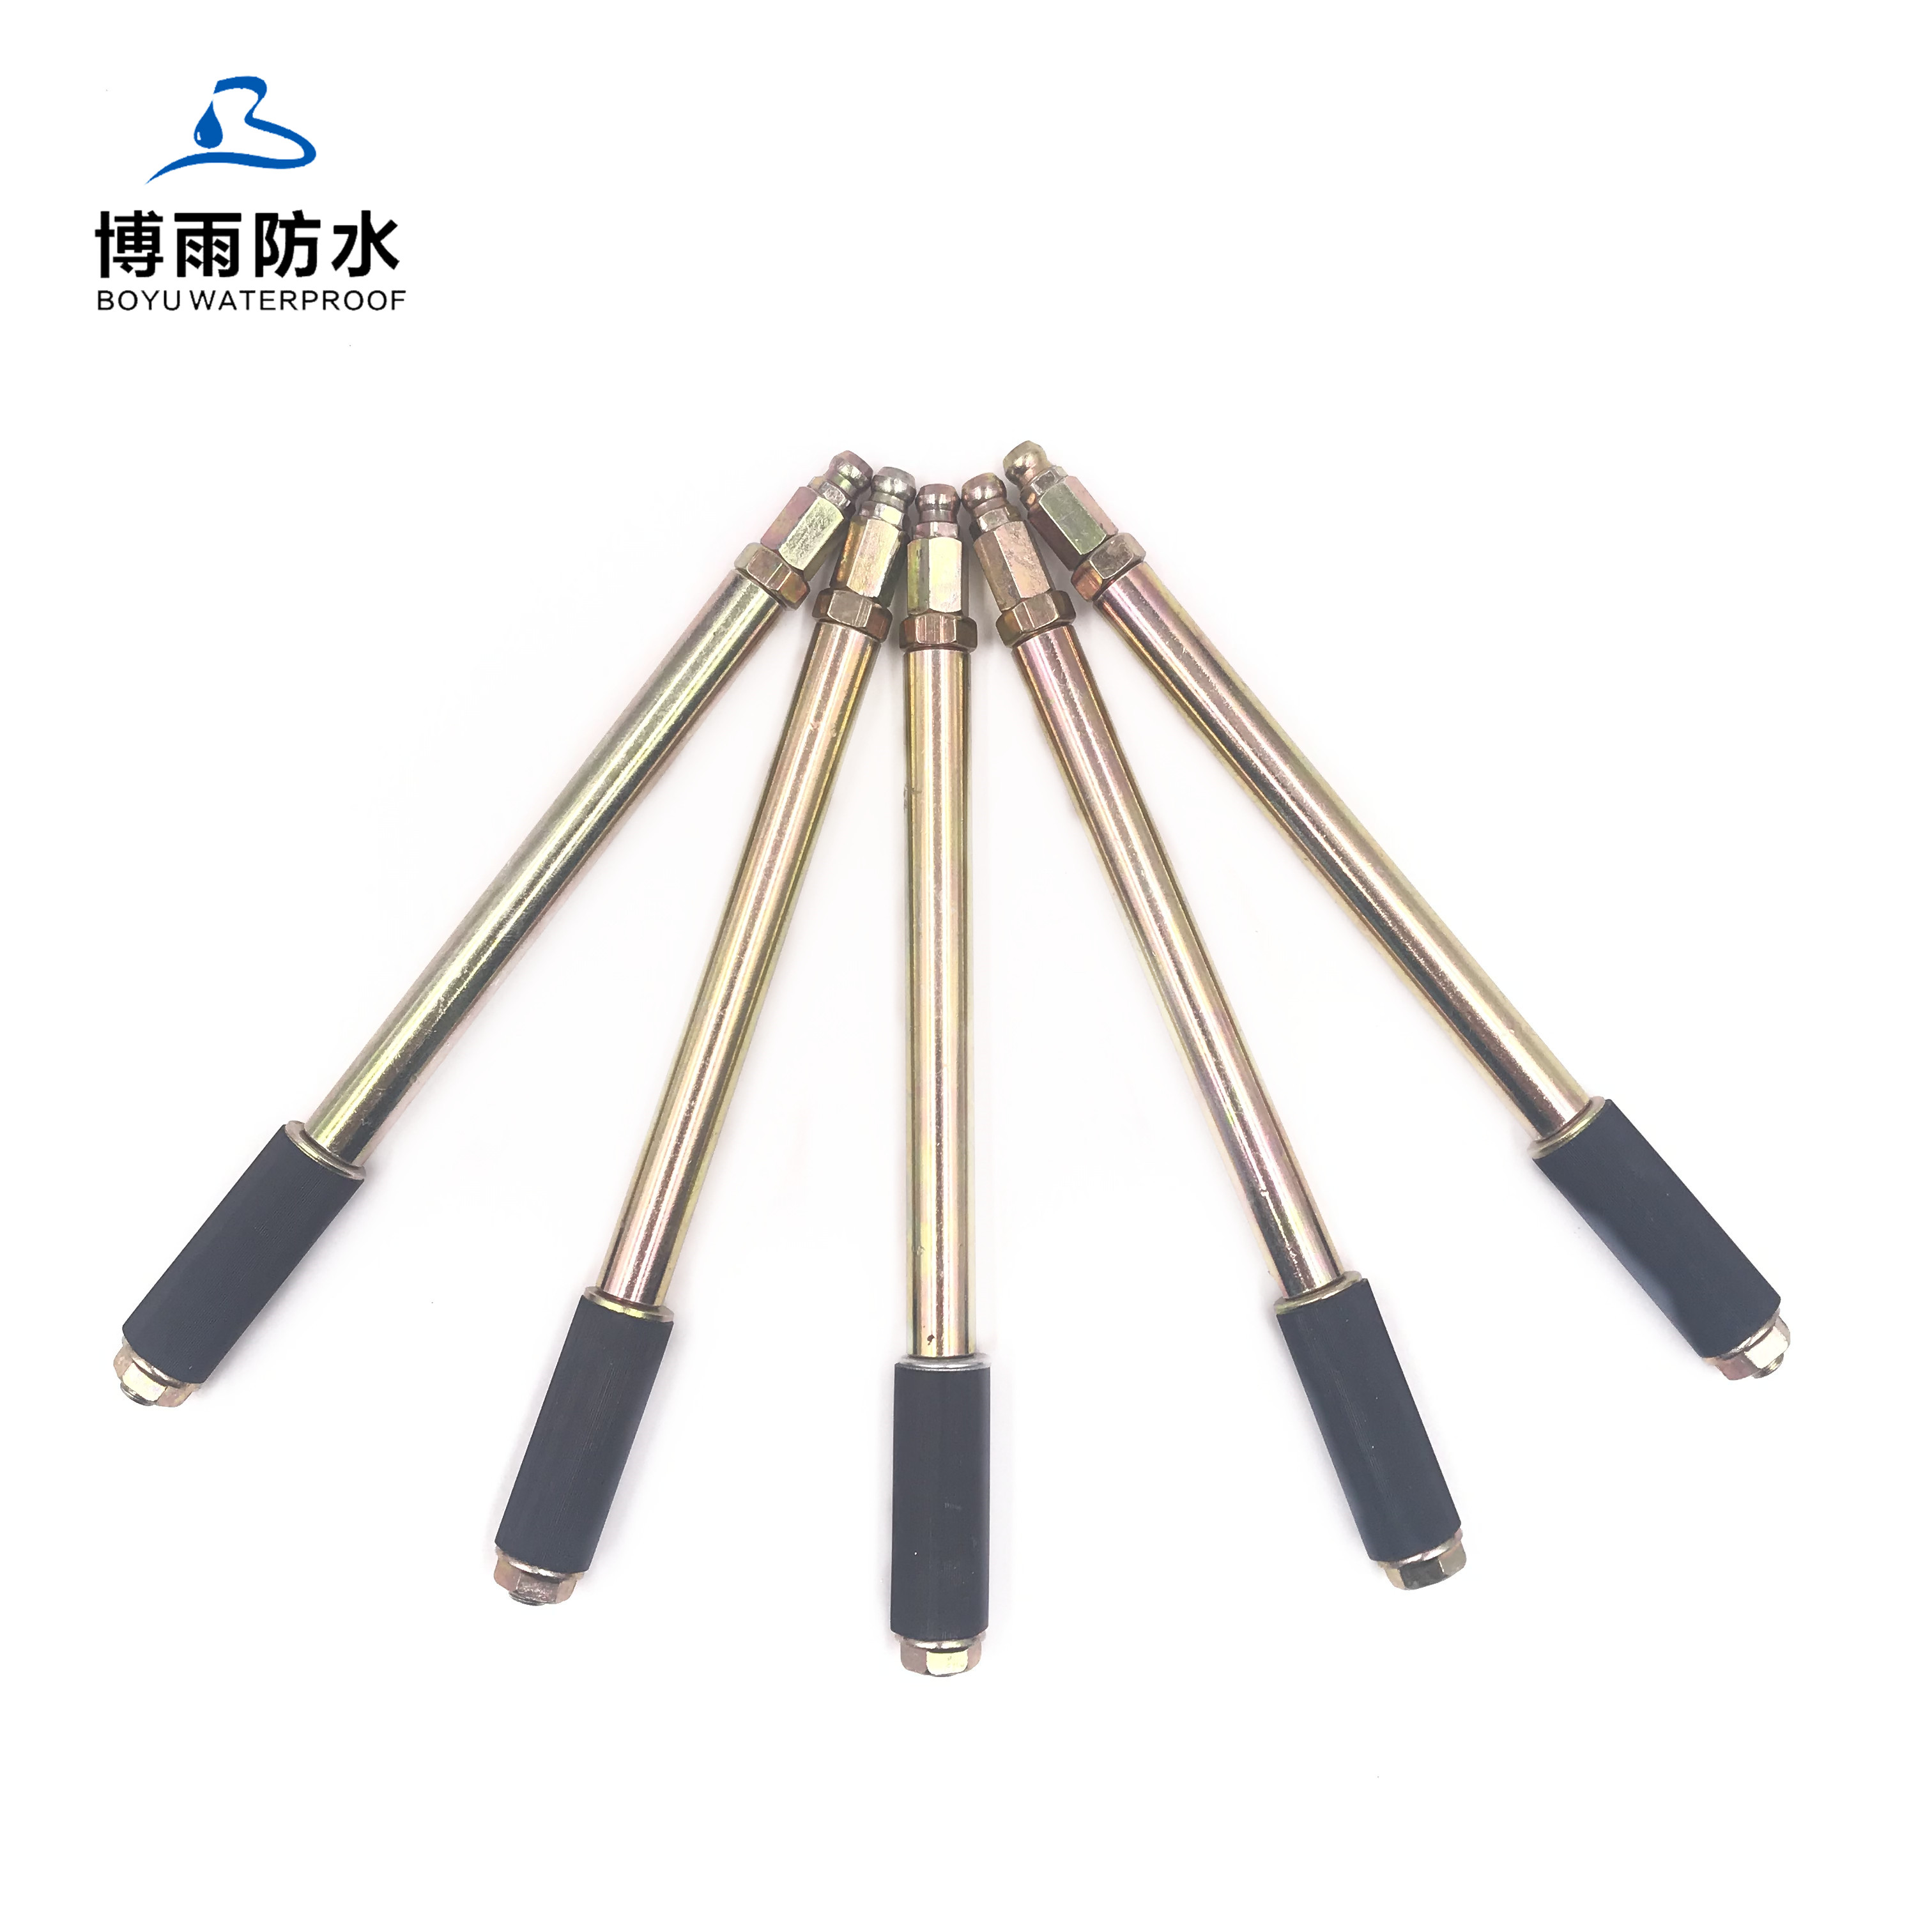 factory low price Resin Injection Packer - Brass color Injection Packers steel 13*150mm A15 grouting injection packers – Boyu